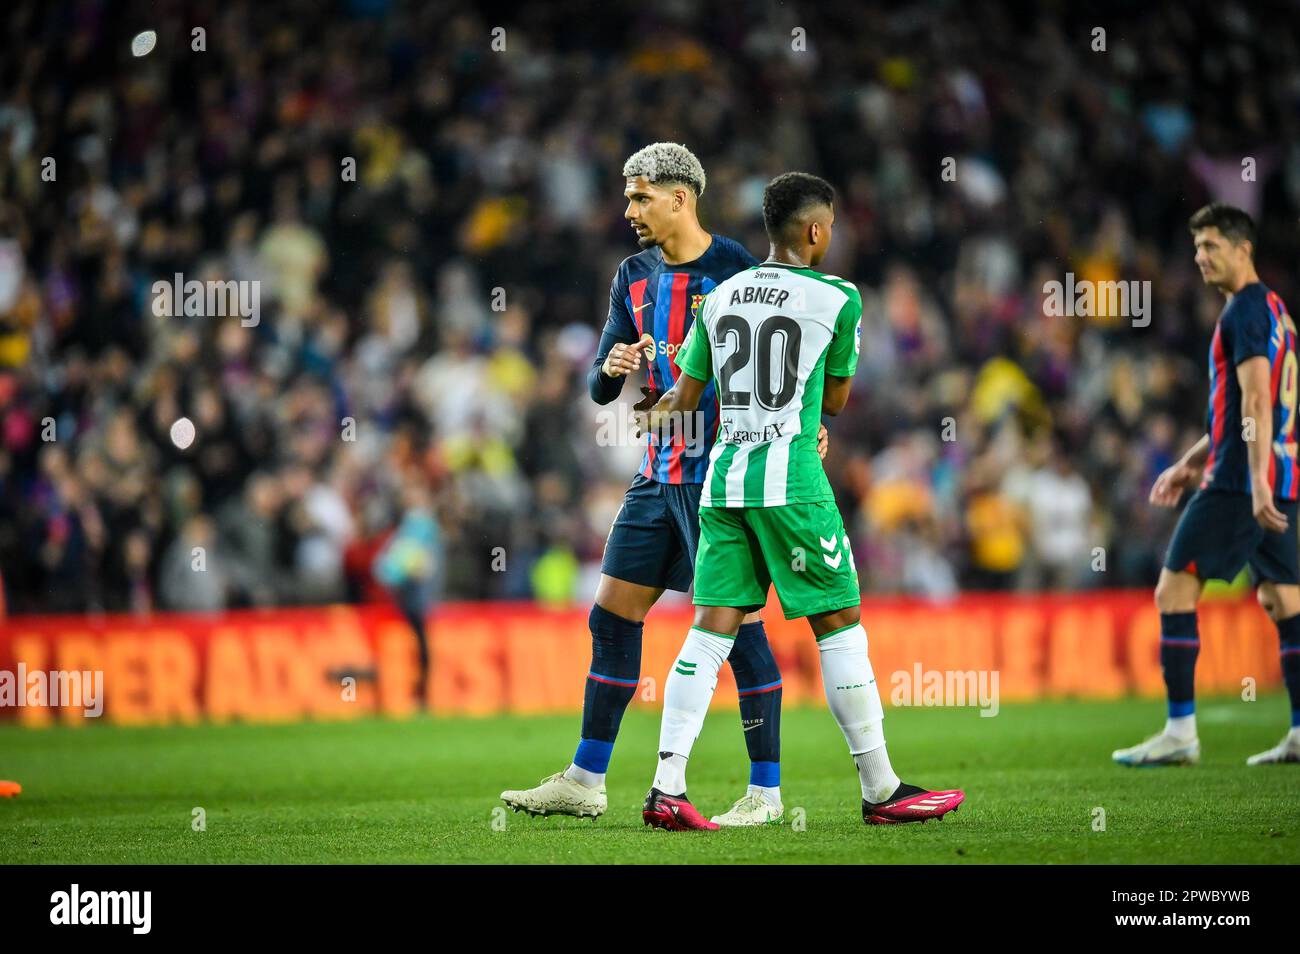 Barcelona, Spain. 29th Apr, 2023. Ronald Araujo (FC Barcelona) and Abner (Betis) during a La Liga Santander match between FC Barcelona and Betis at Spotify Camp Nou, in Barcelona, Spain on April 29, 2023. (Photo/Felipe Mondino) Credit: Independent Photo Agency/Alamy Live News Stock Photo